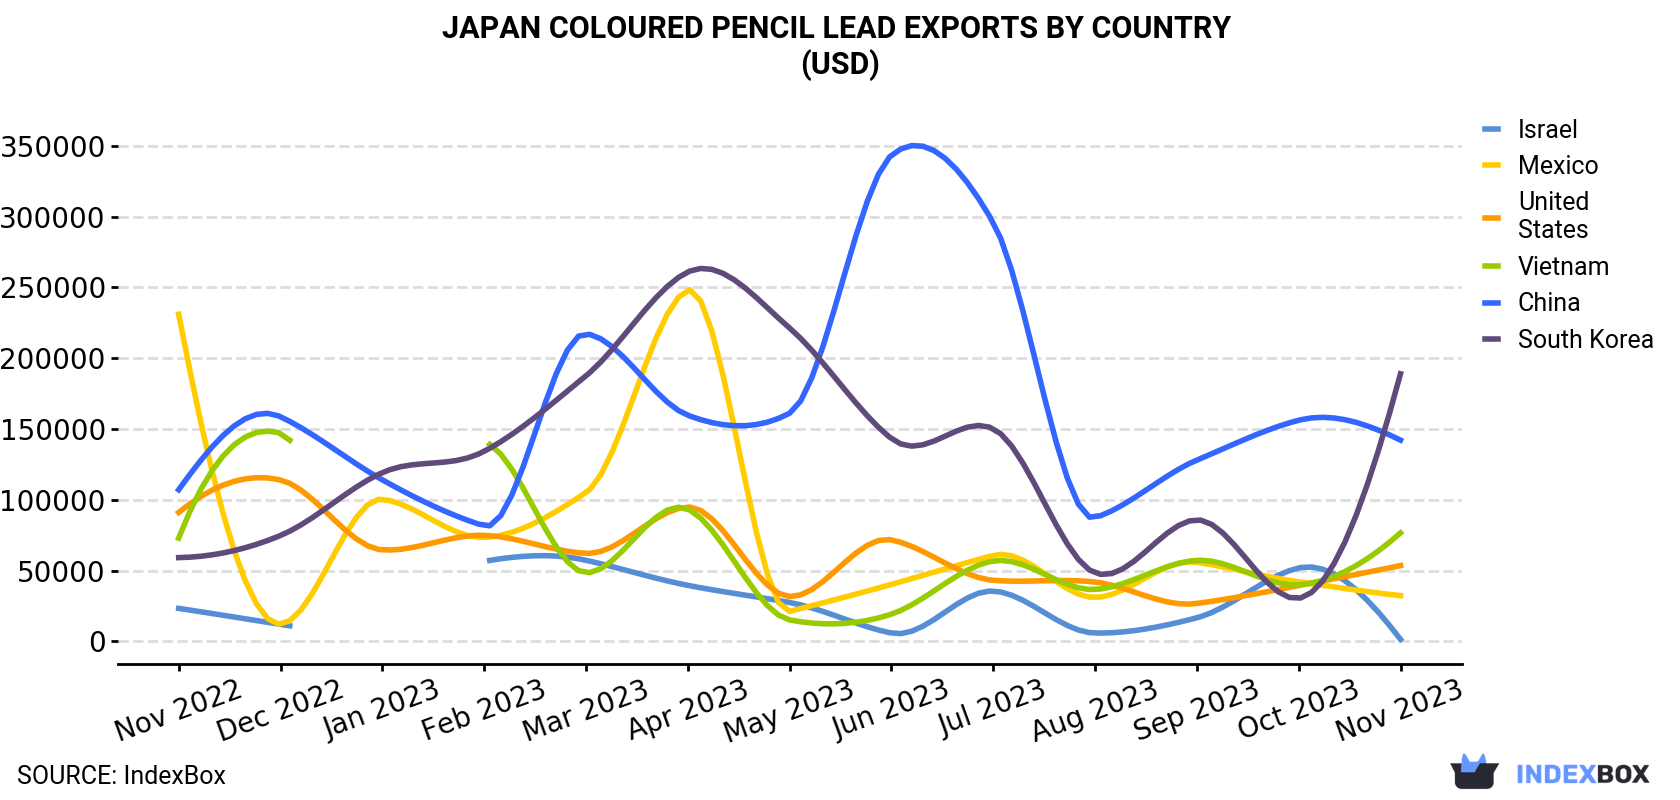 Japan Coloured Pencil Lead Exports By Country (USD)